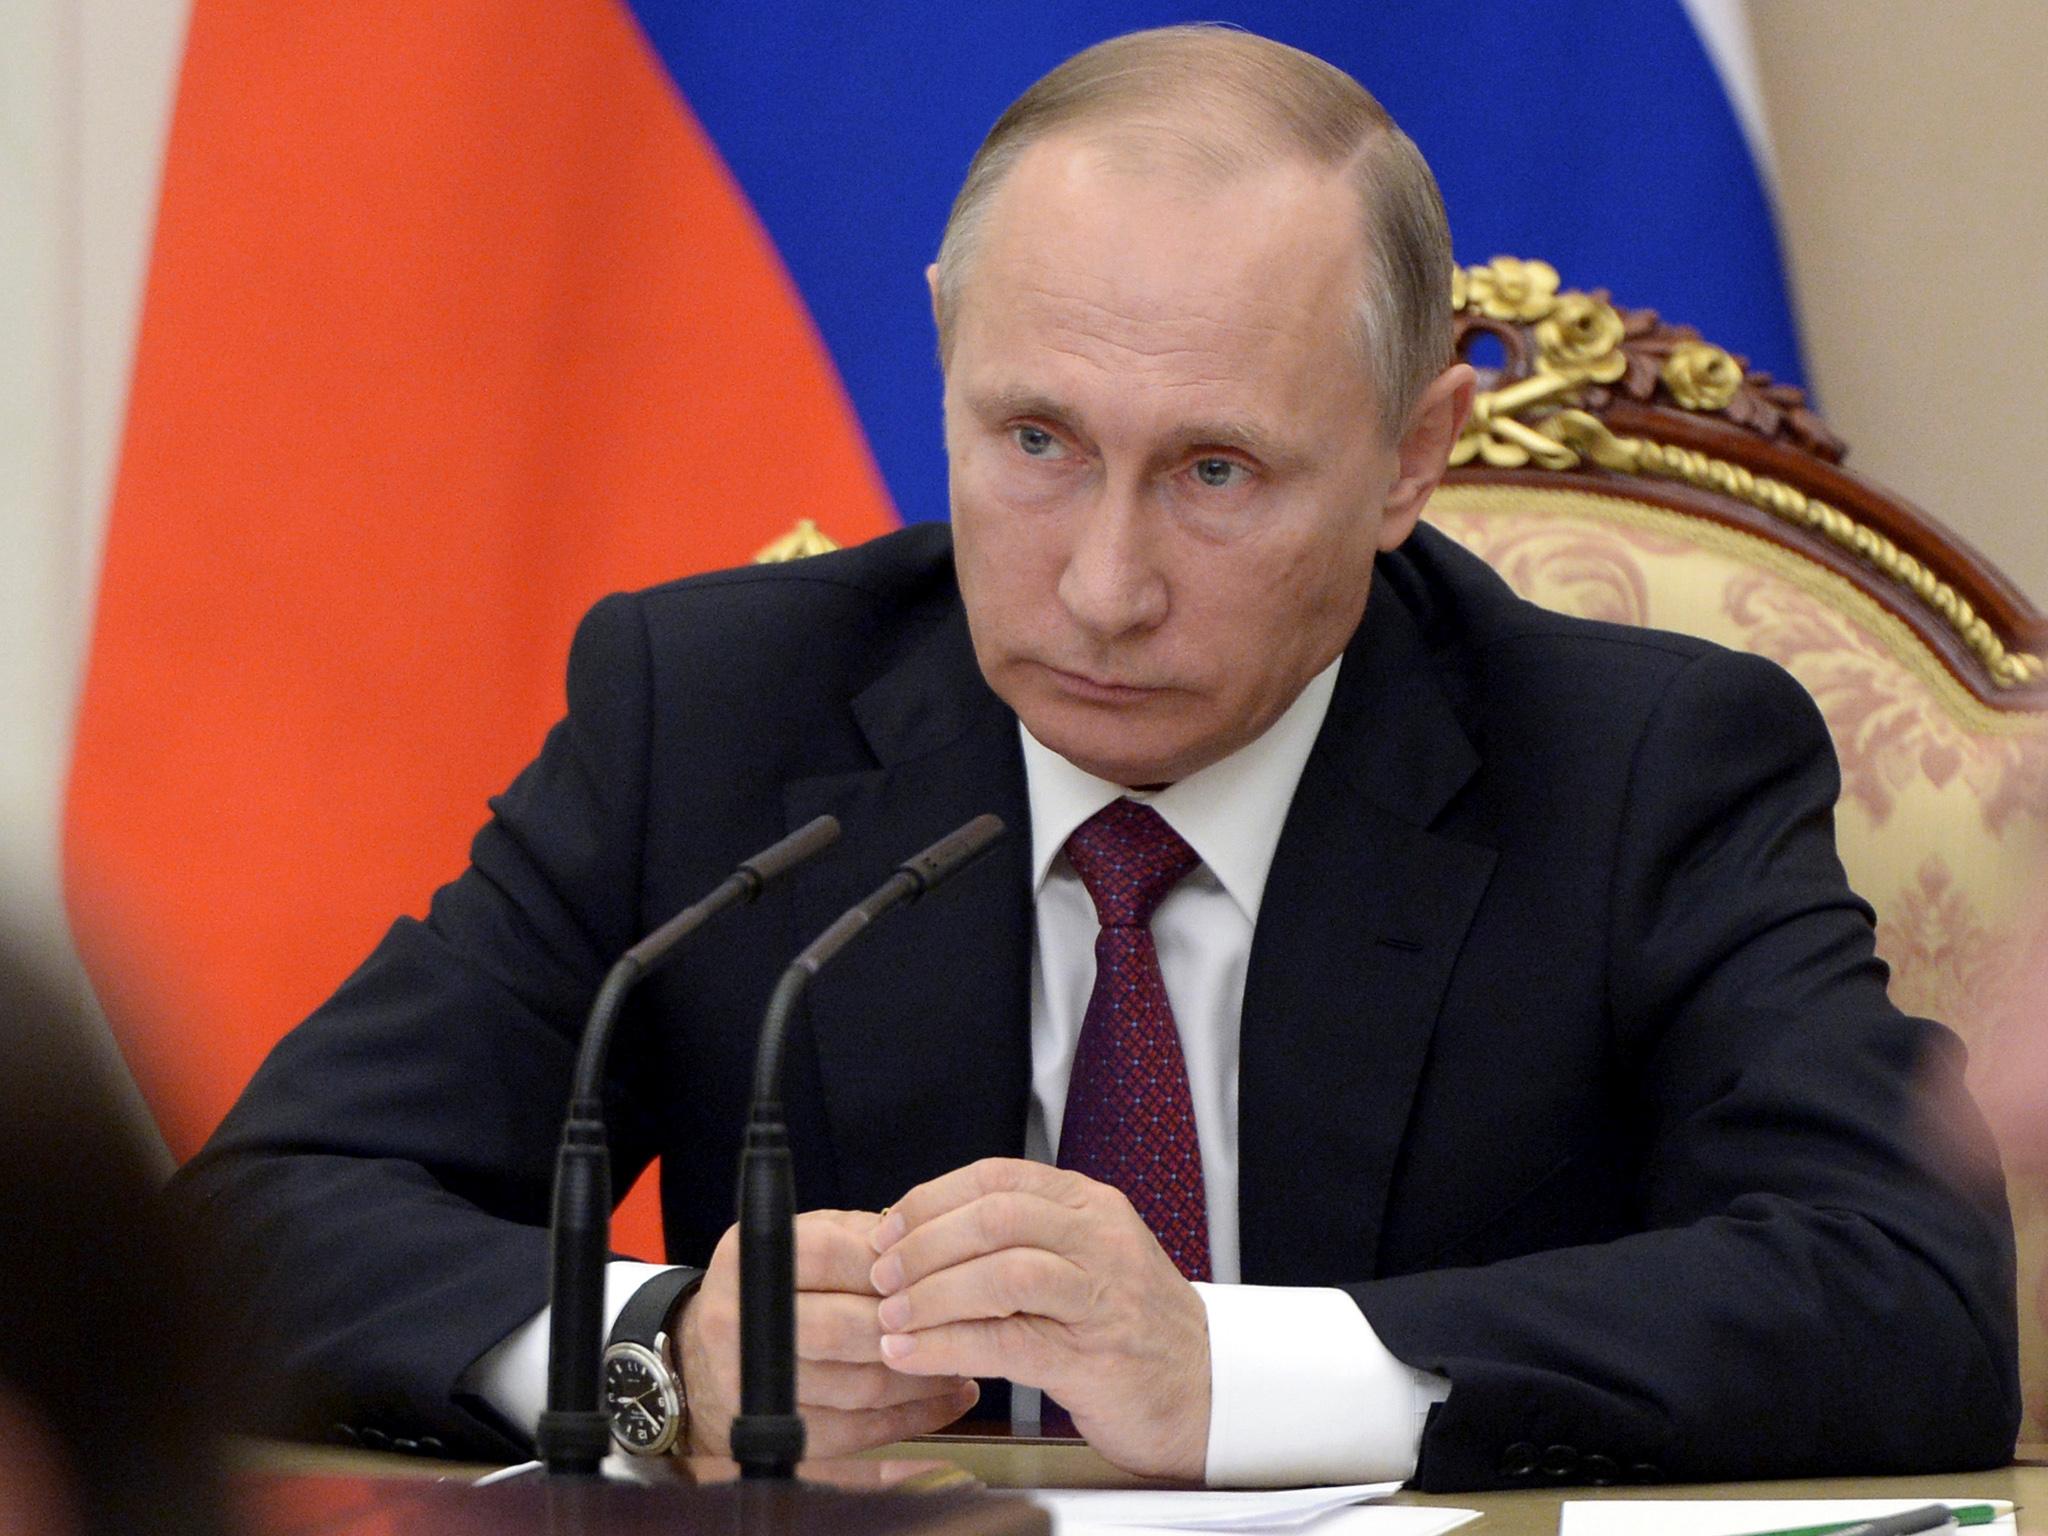 Russian President Vladimir Putin hopes to restore some of the powers of the old KGB under a new guise